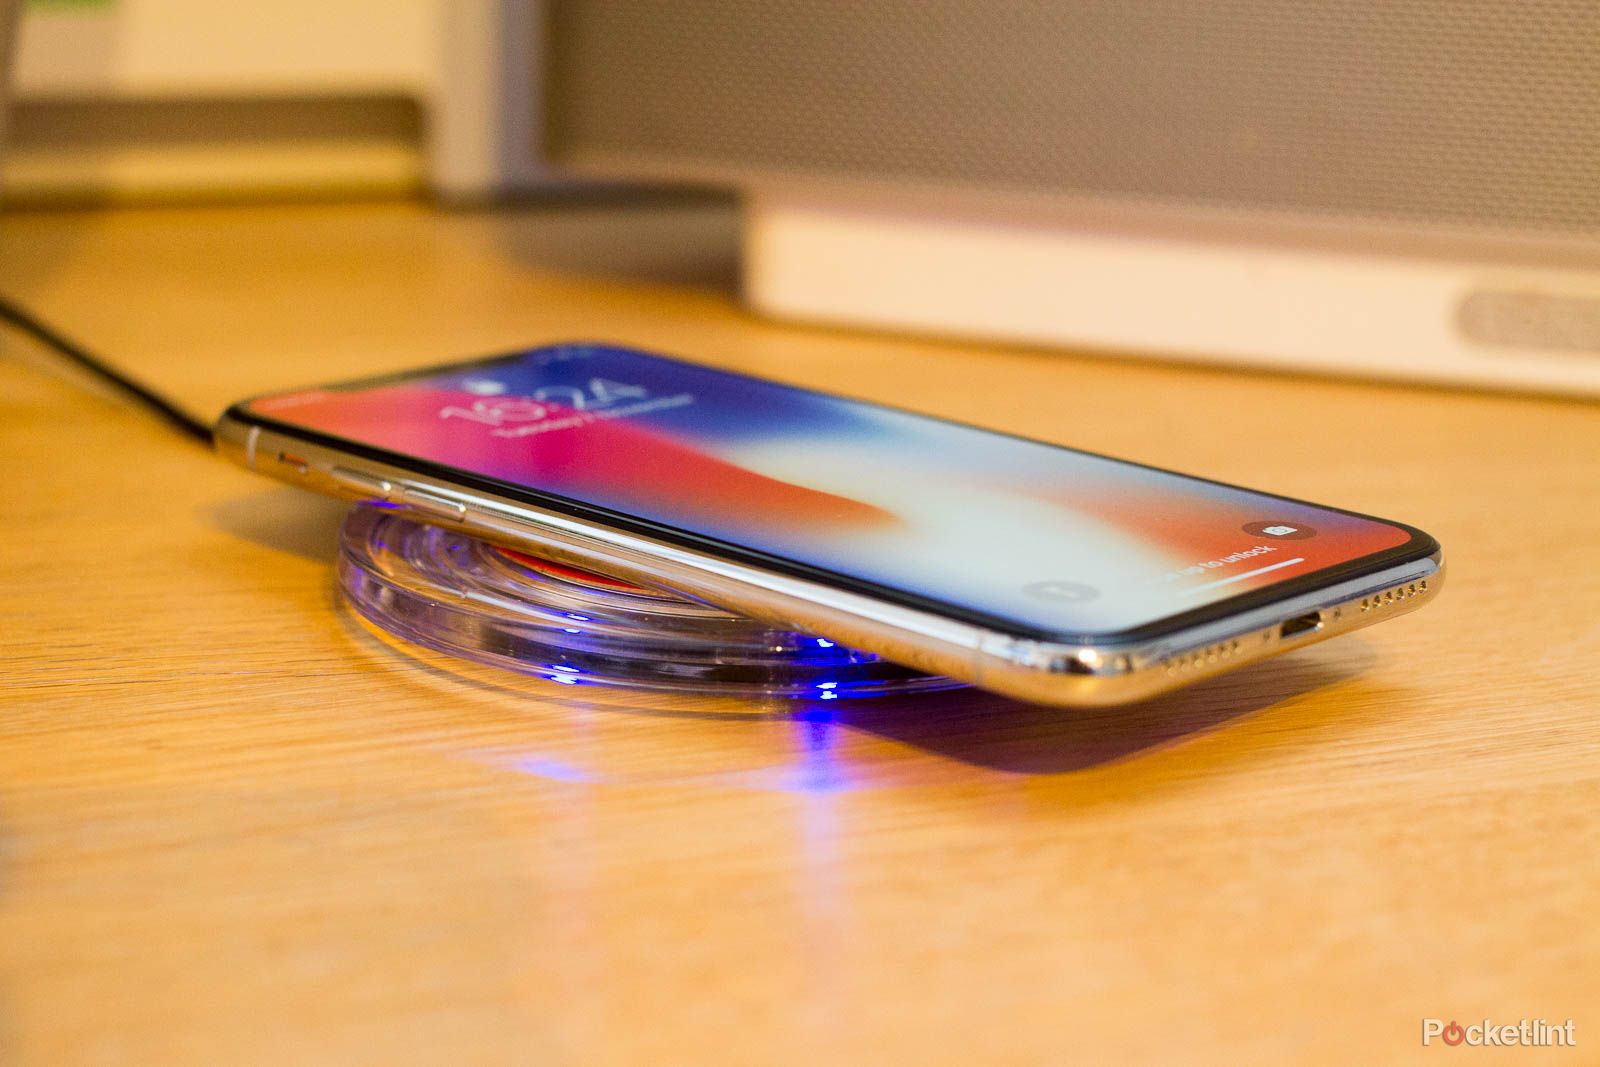 Wireless charging explained: Power your iPhone or Android phone